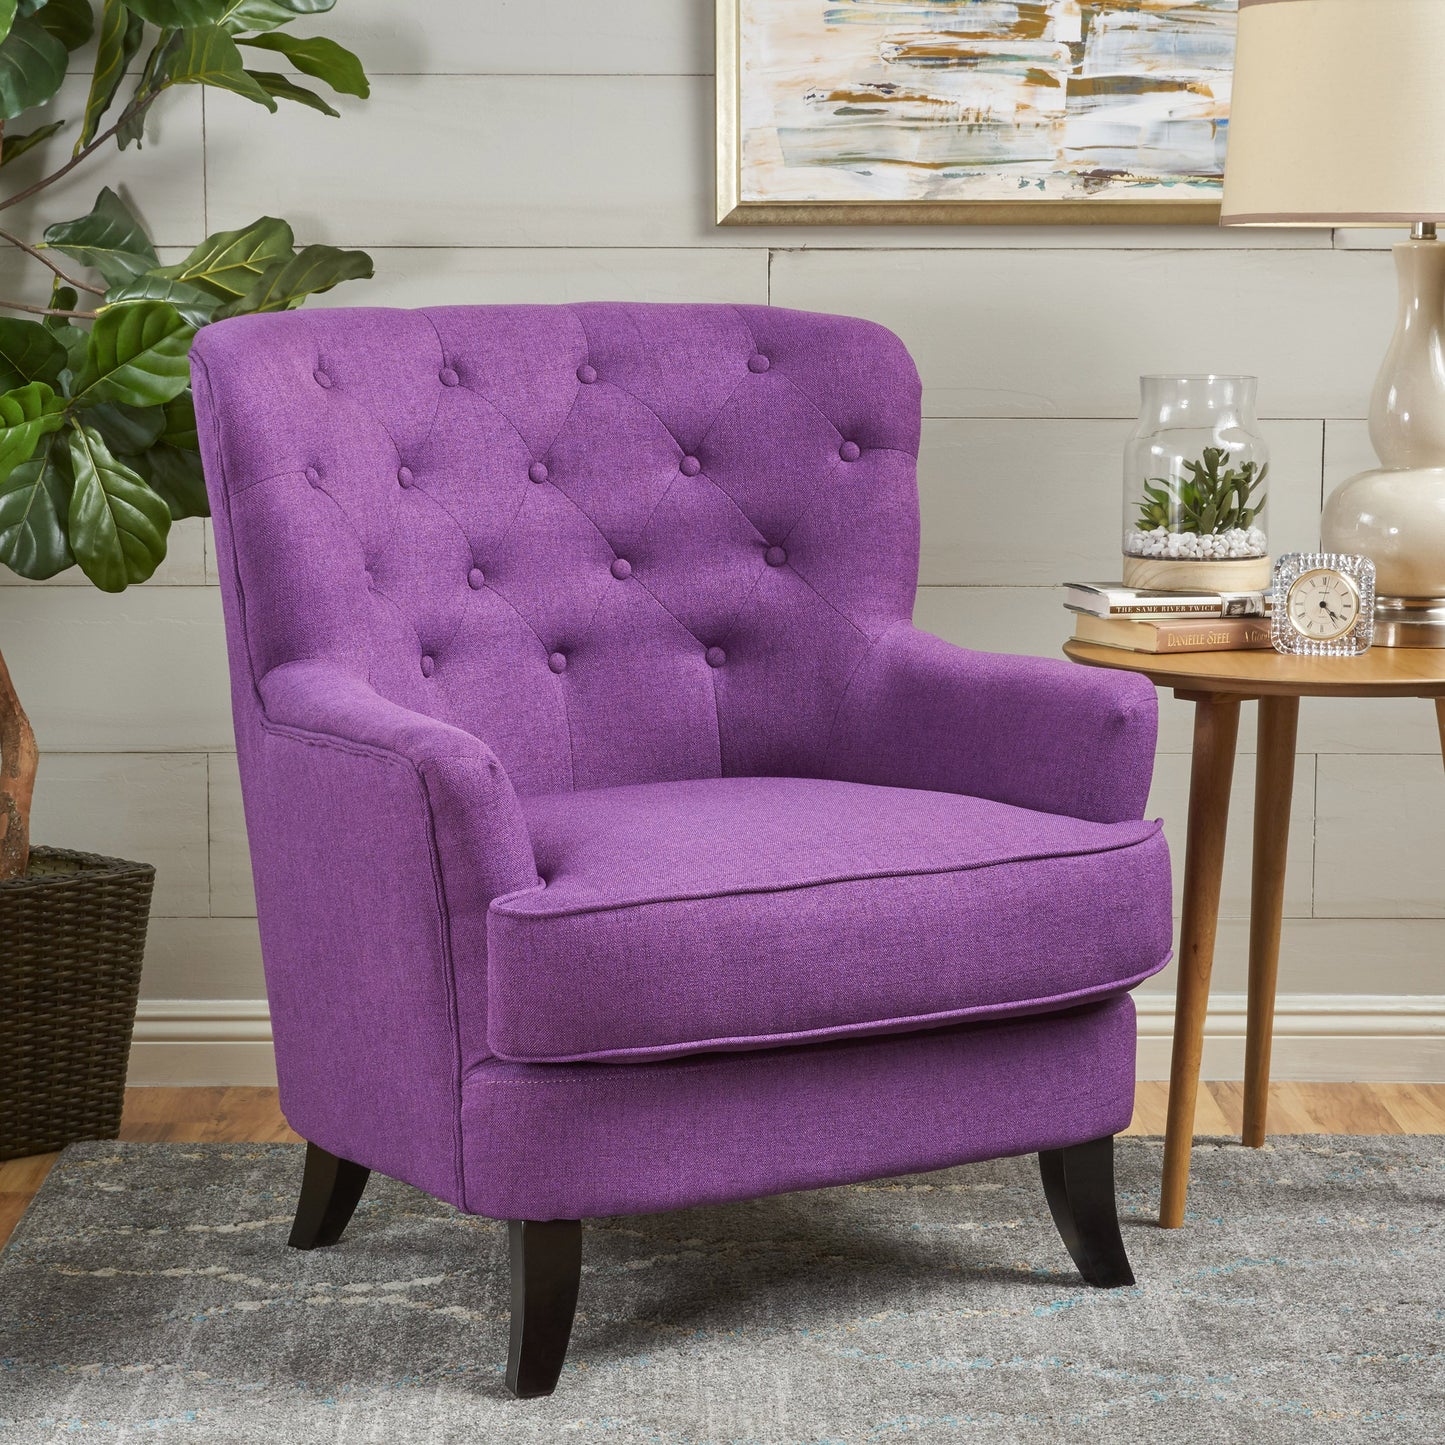 Annelia Contemporary Button Tufted Upholstered Fabric Club chair w/ Piped Edges